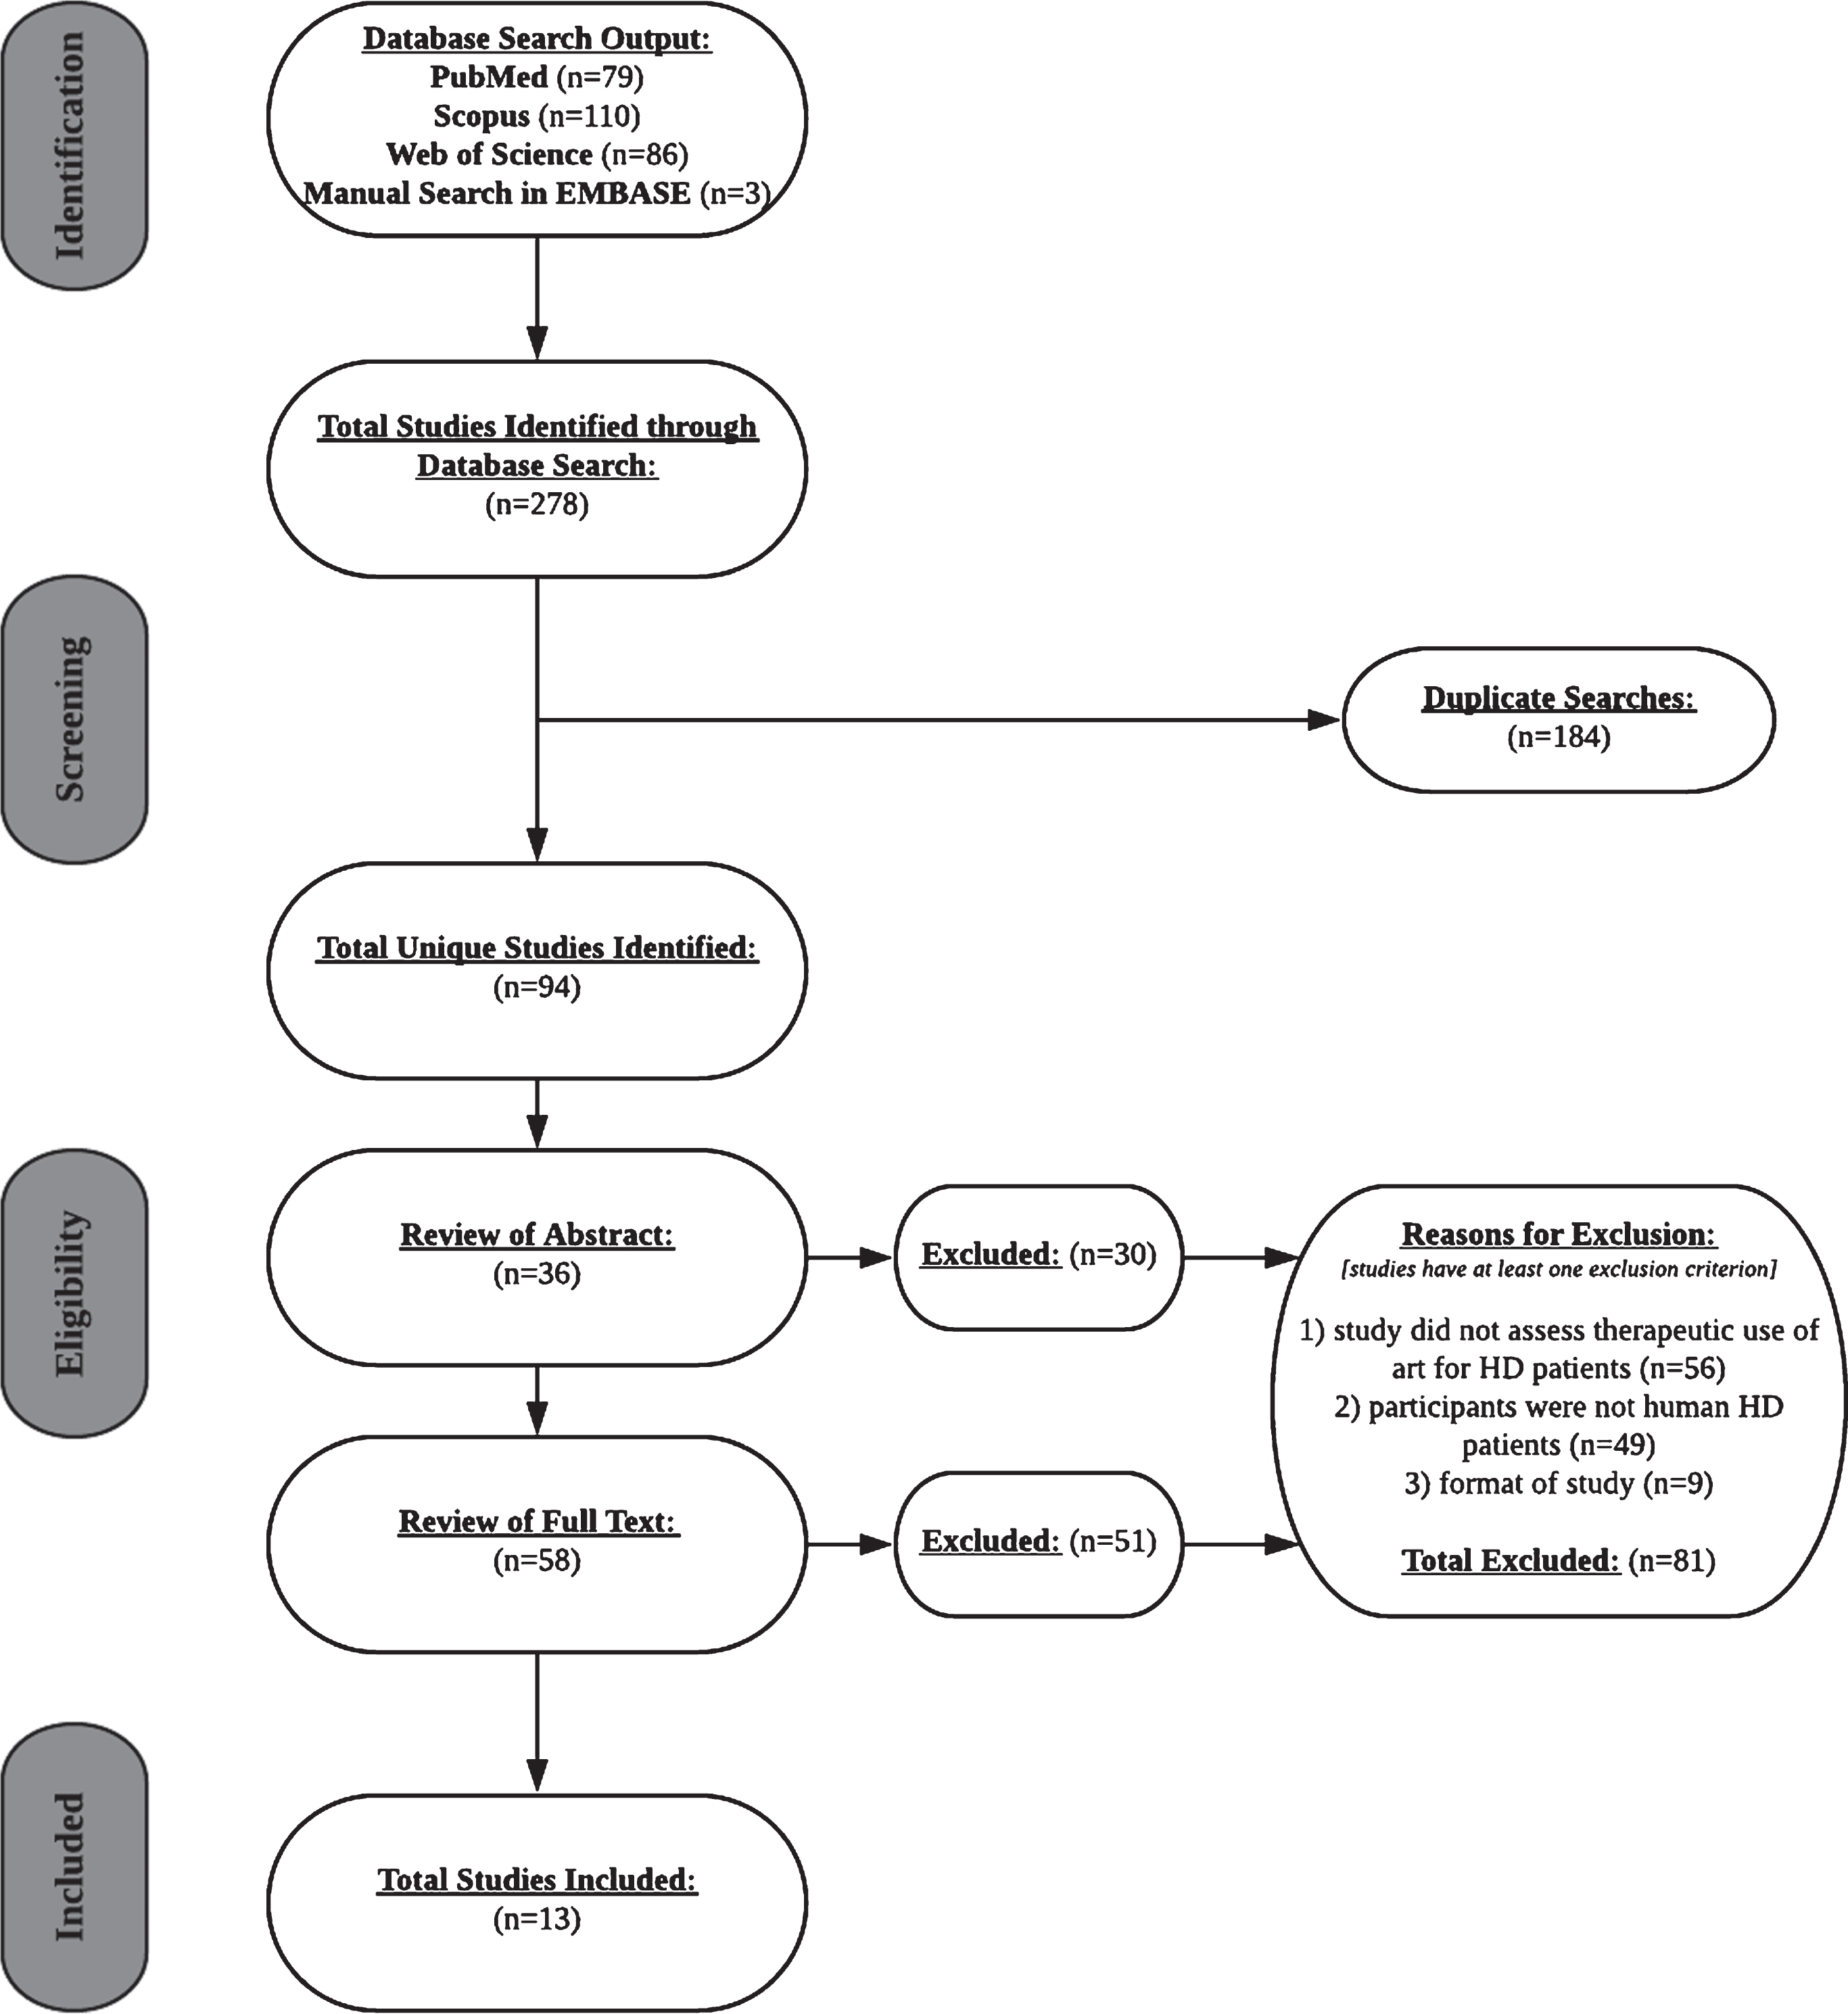 PRISMA flow chart of the selection process of included studies.